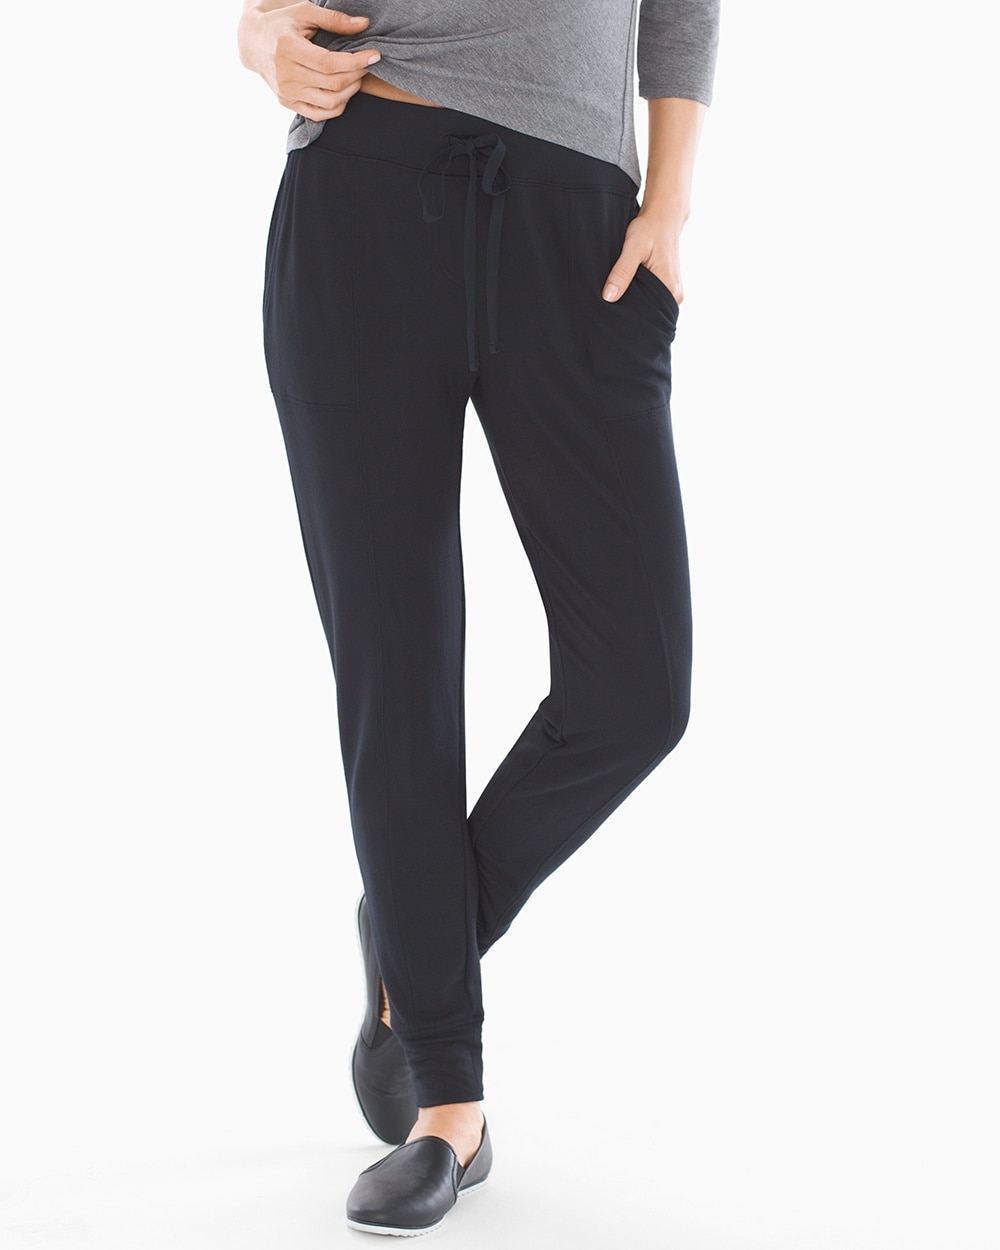 French Terry Seamed Jogger Pants Black